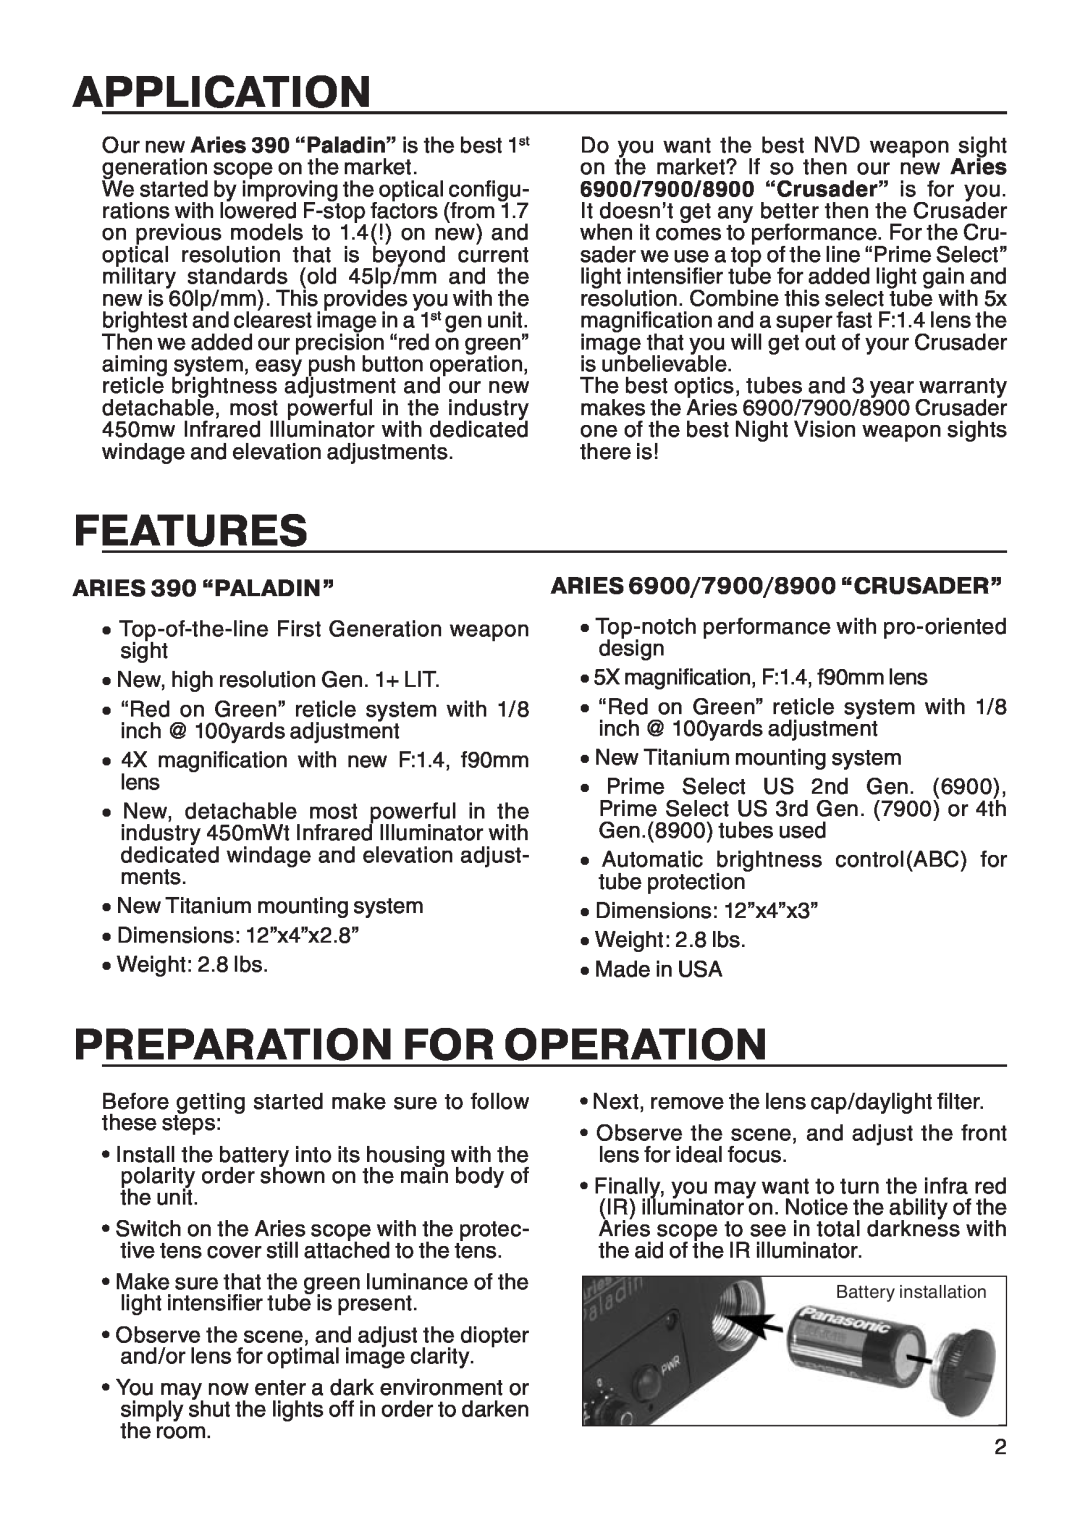 ATN ATN Aries 7900 Application, Features, Preparation For Operation, ARIES 390 “PALADIN”, ARIES 6900/7900/8900 “CRUSADER” 